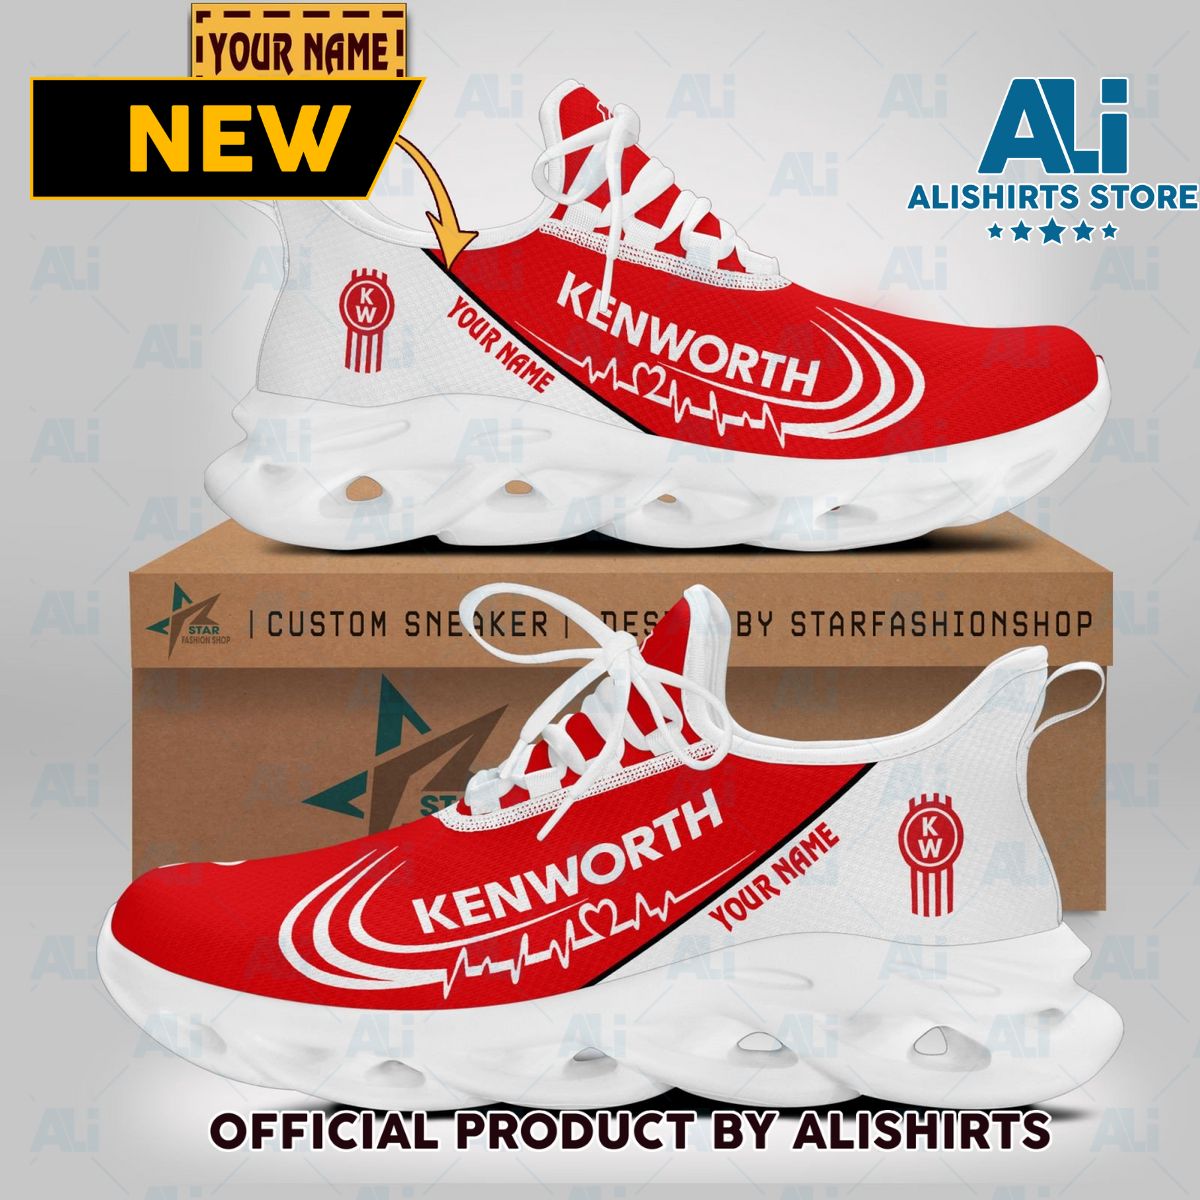 Kenworth Car Brand Lover Clunky Sneaker Max Soul Shoes